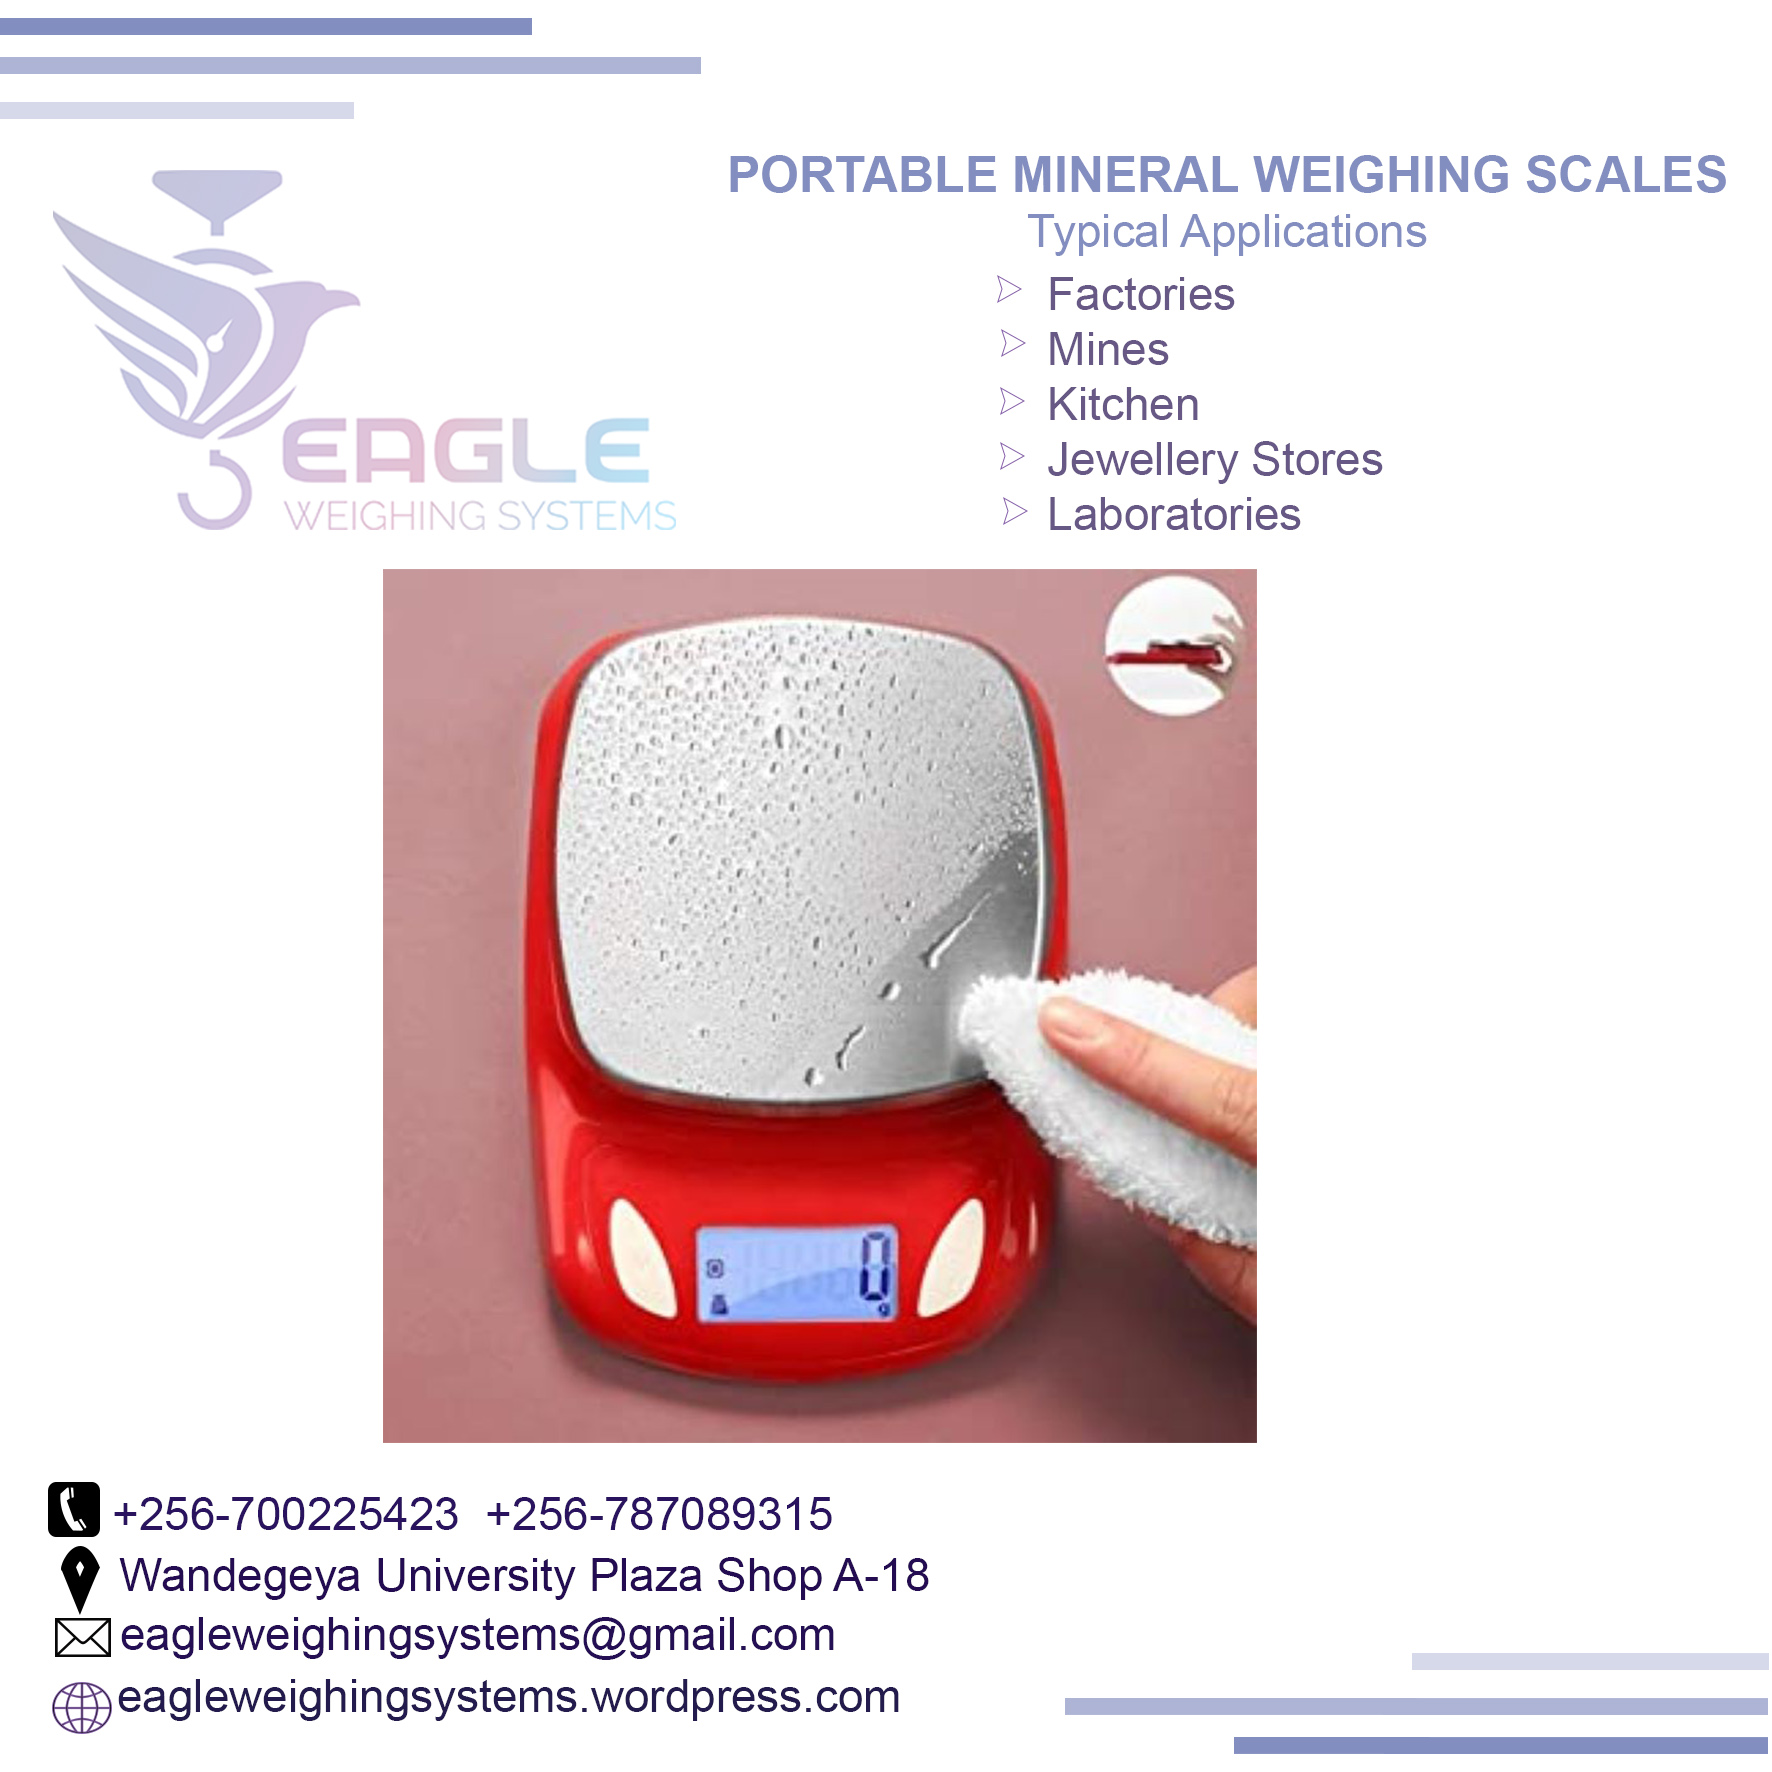 Digital Portable mineral, jewelry weighing scales for sale in Kampala Uganda, Kampala District, Central, Uganda